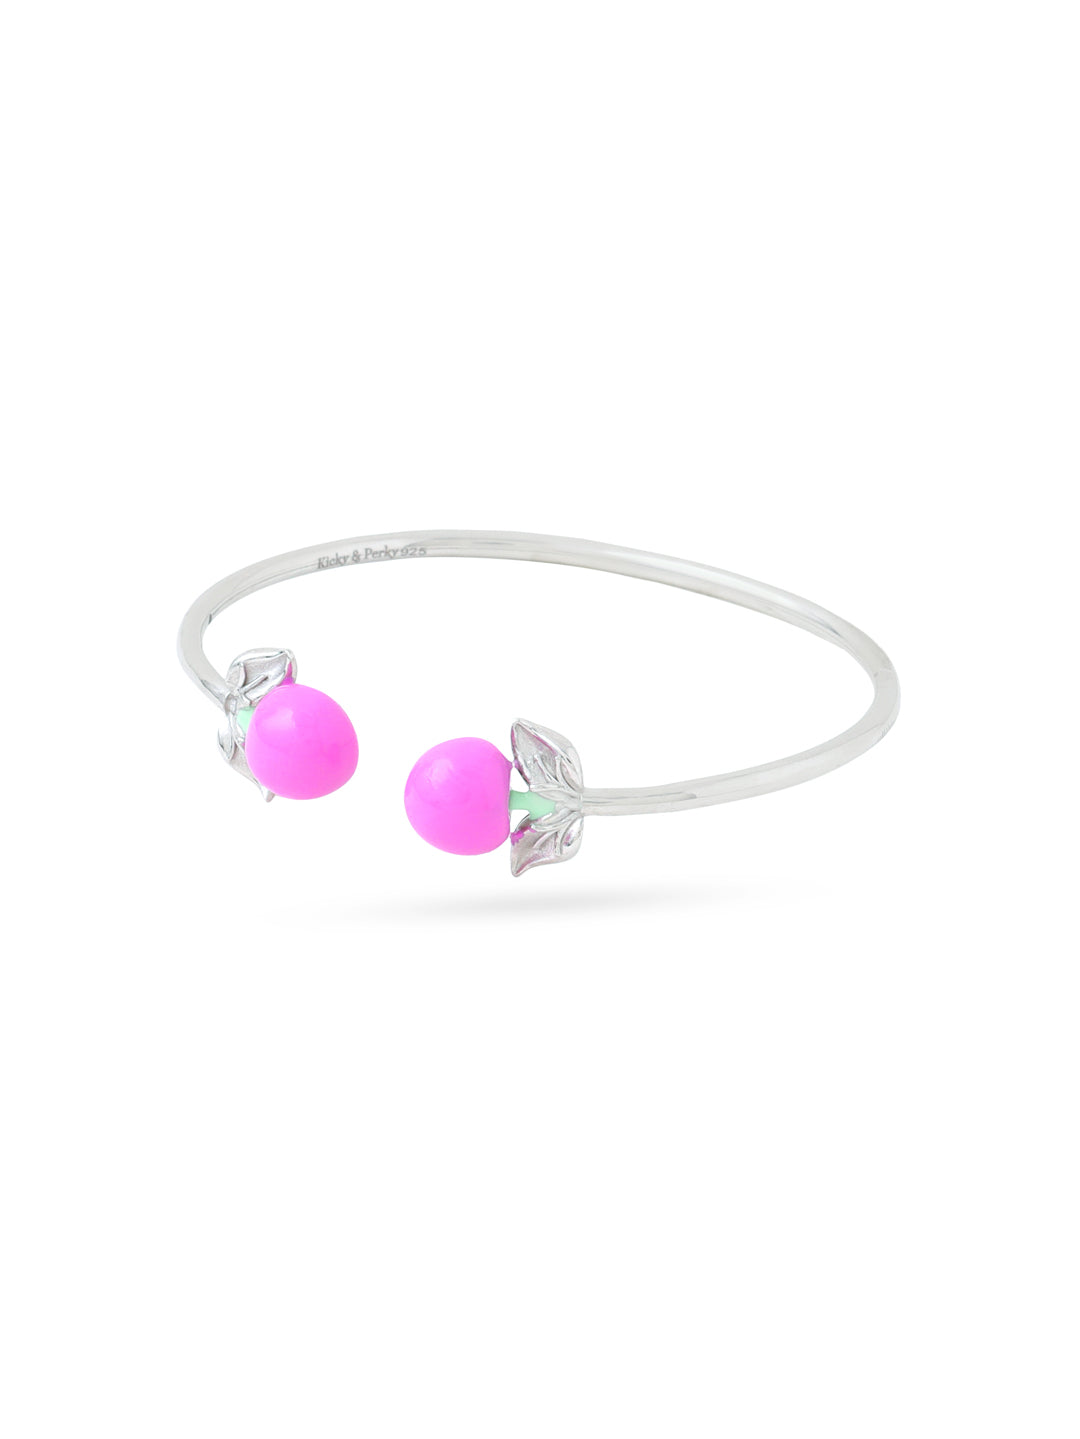 Rhodium Pink and Green Summer Fruit Corolla Collection Cuff Bracelet